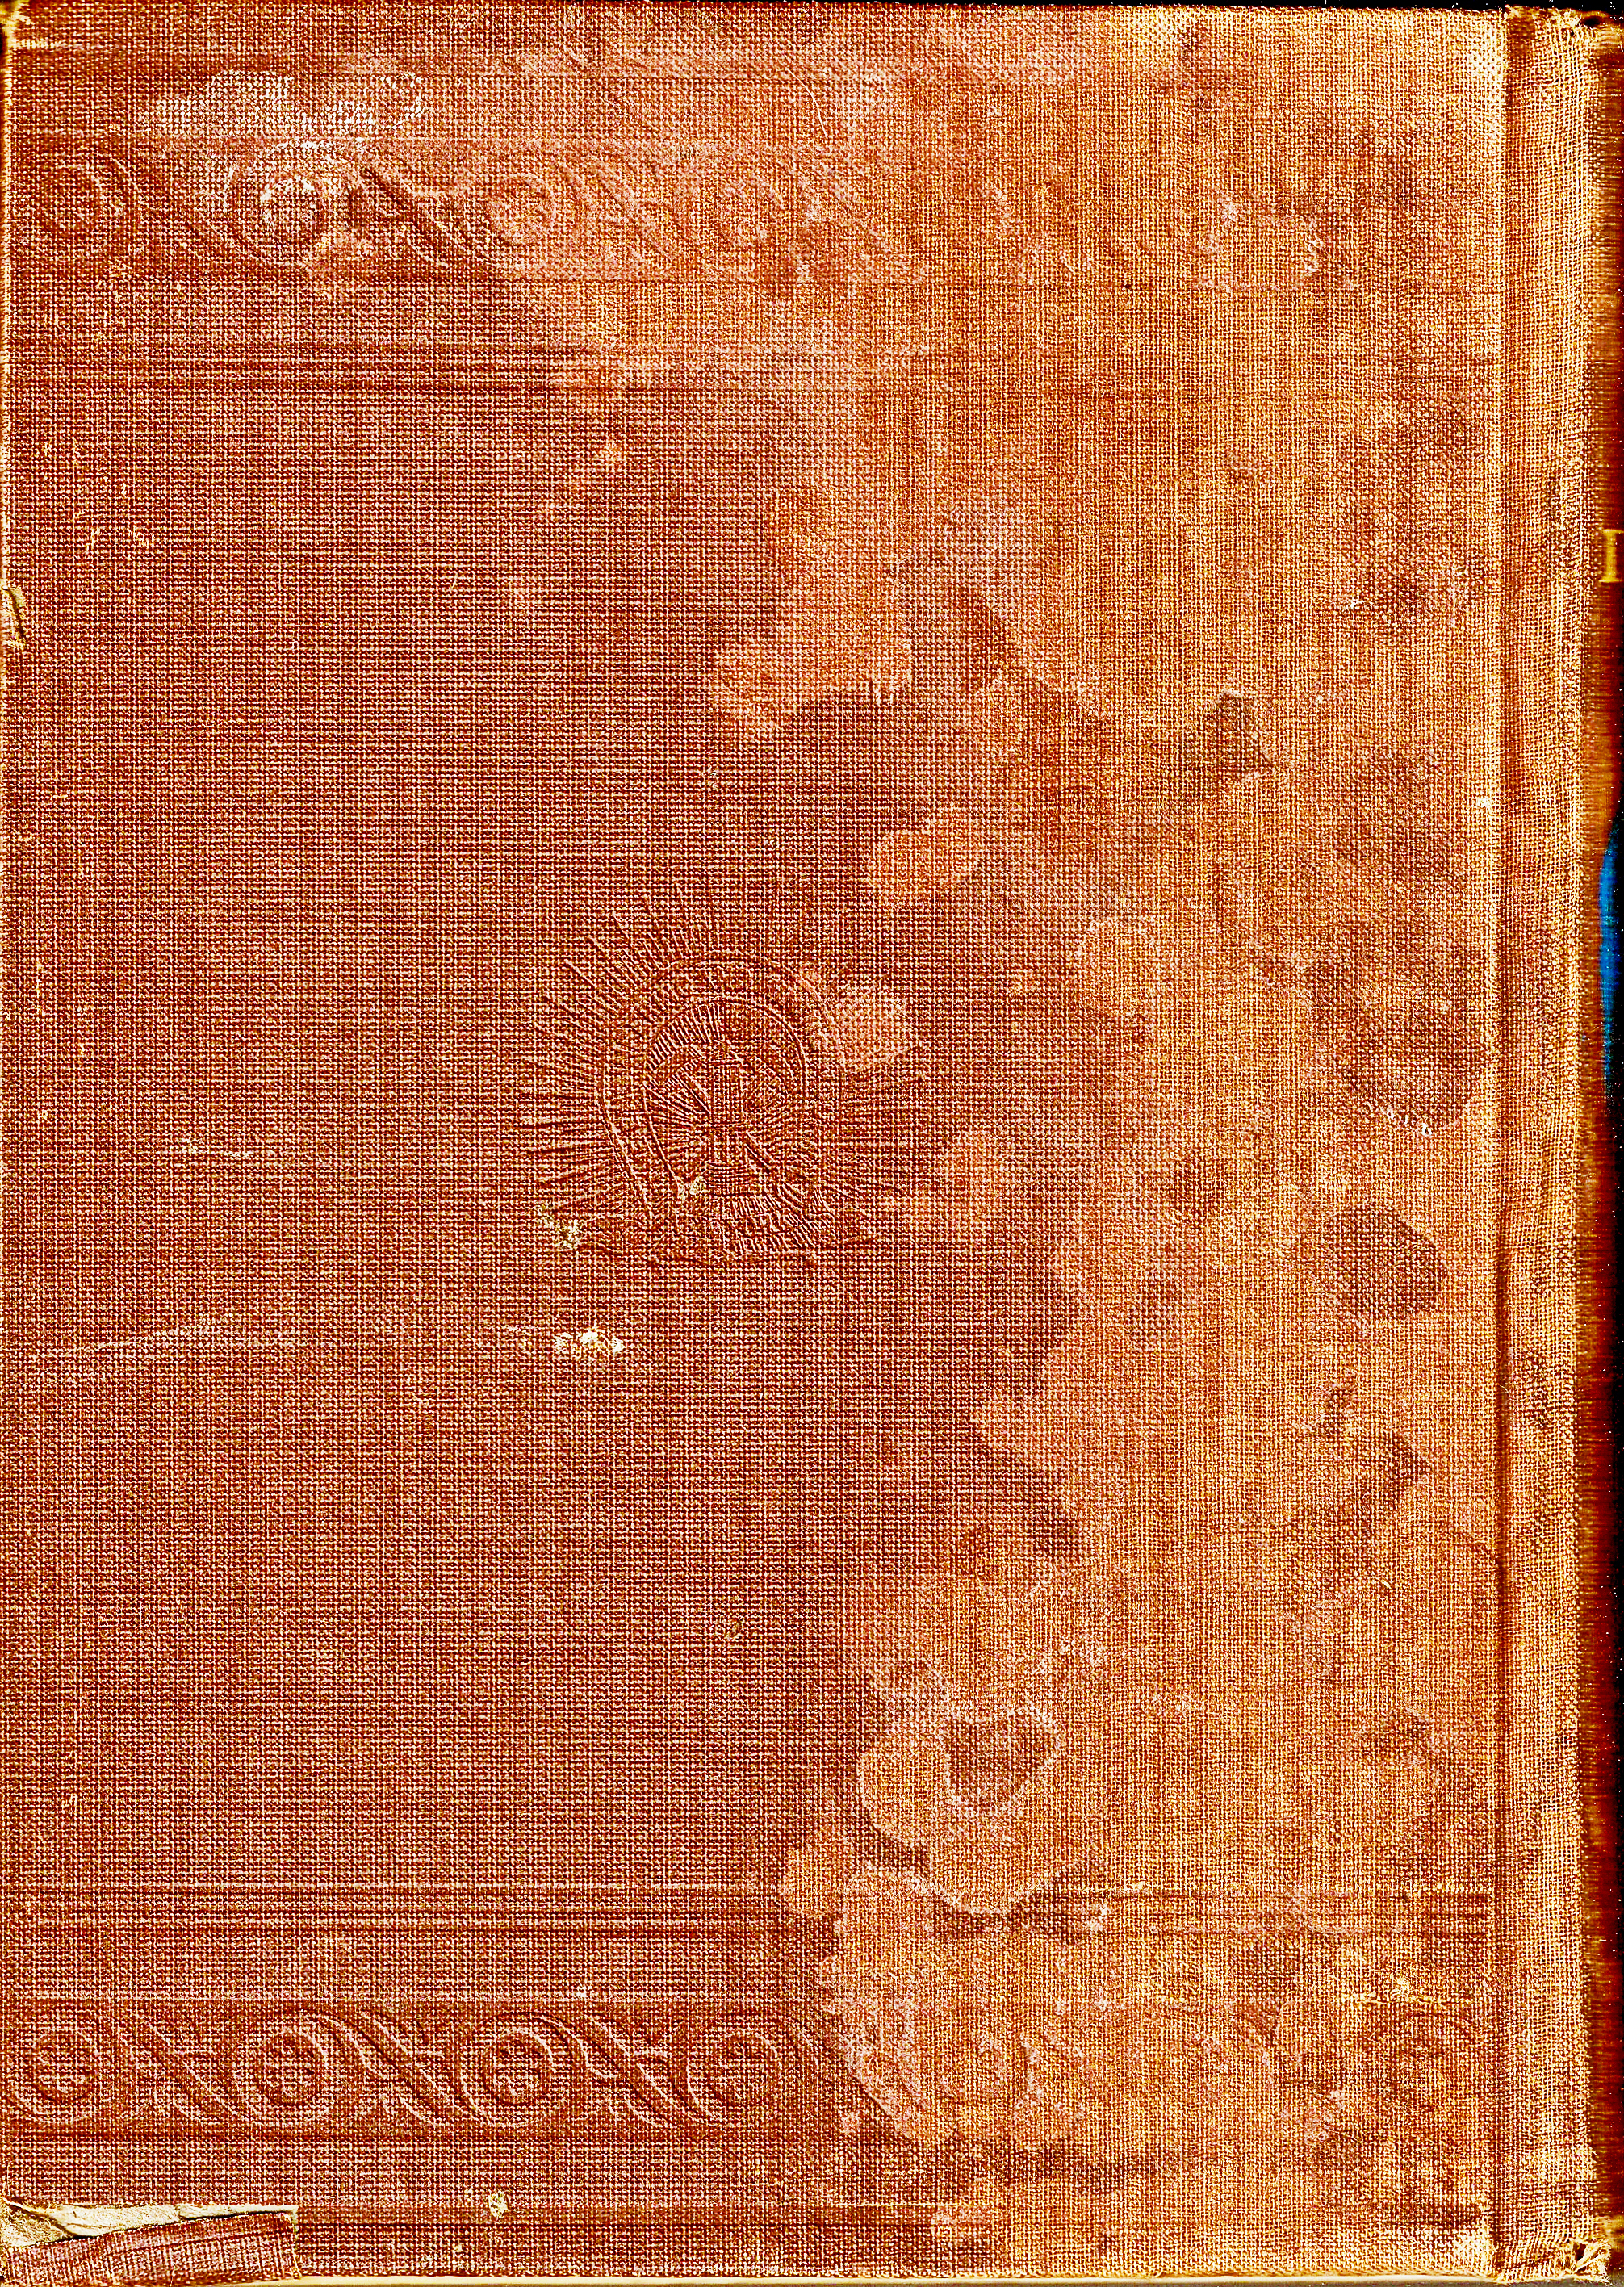 This Rusty Brown Book Cover Back Has Some Lovely Damage From Water